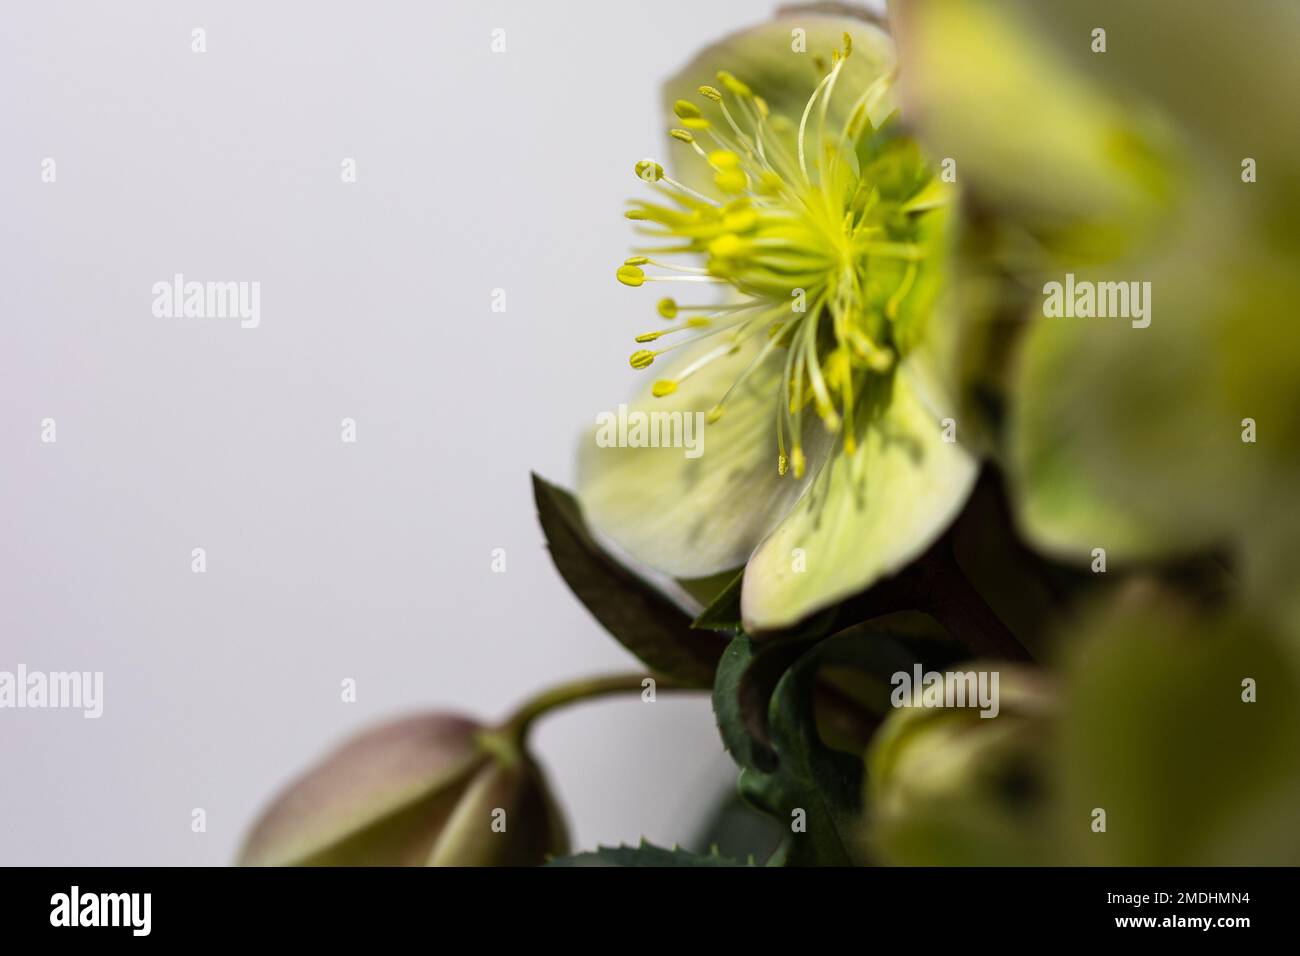 Close-up of a white and green Christmas rose (Helleborus niger) in bright light Stock Photo